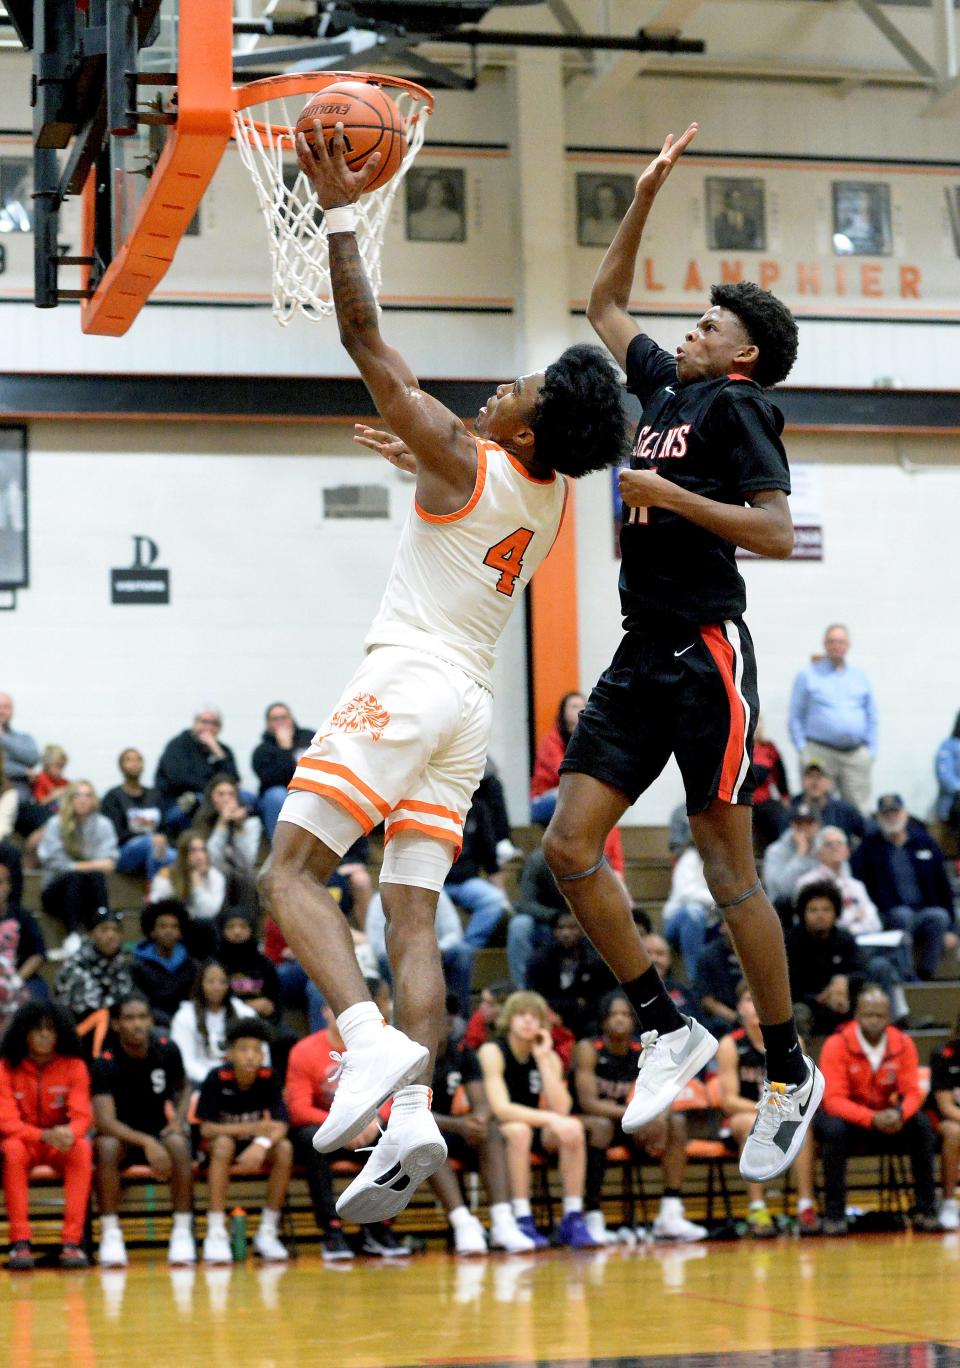 Lanphier's Jaiquan Holman goes up for a shot while being guarded by Springfield's Jaiyden Wilson during the game Friday, Dec. 8, 2023.